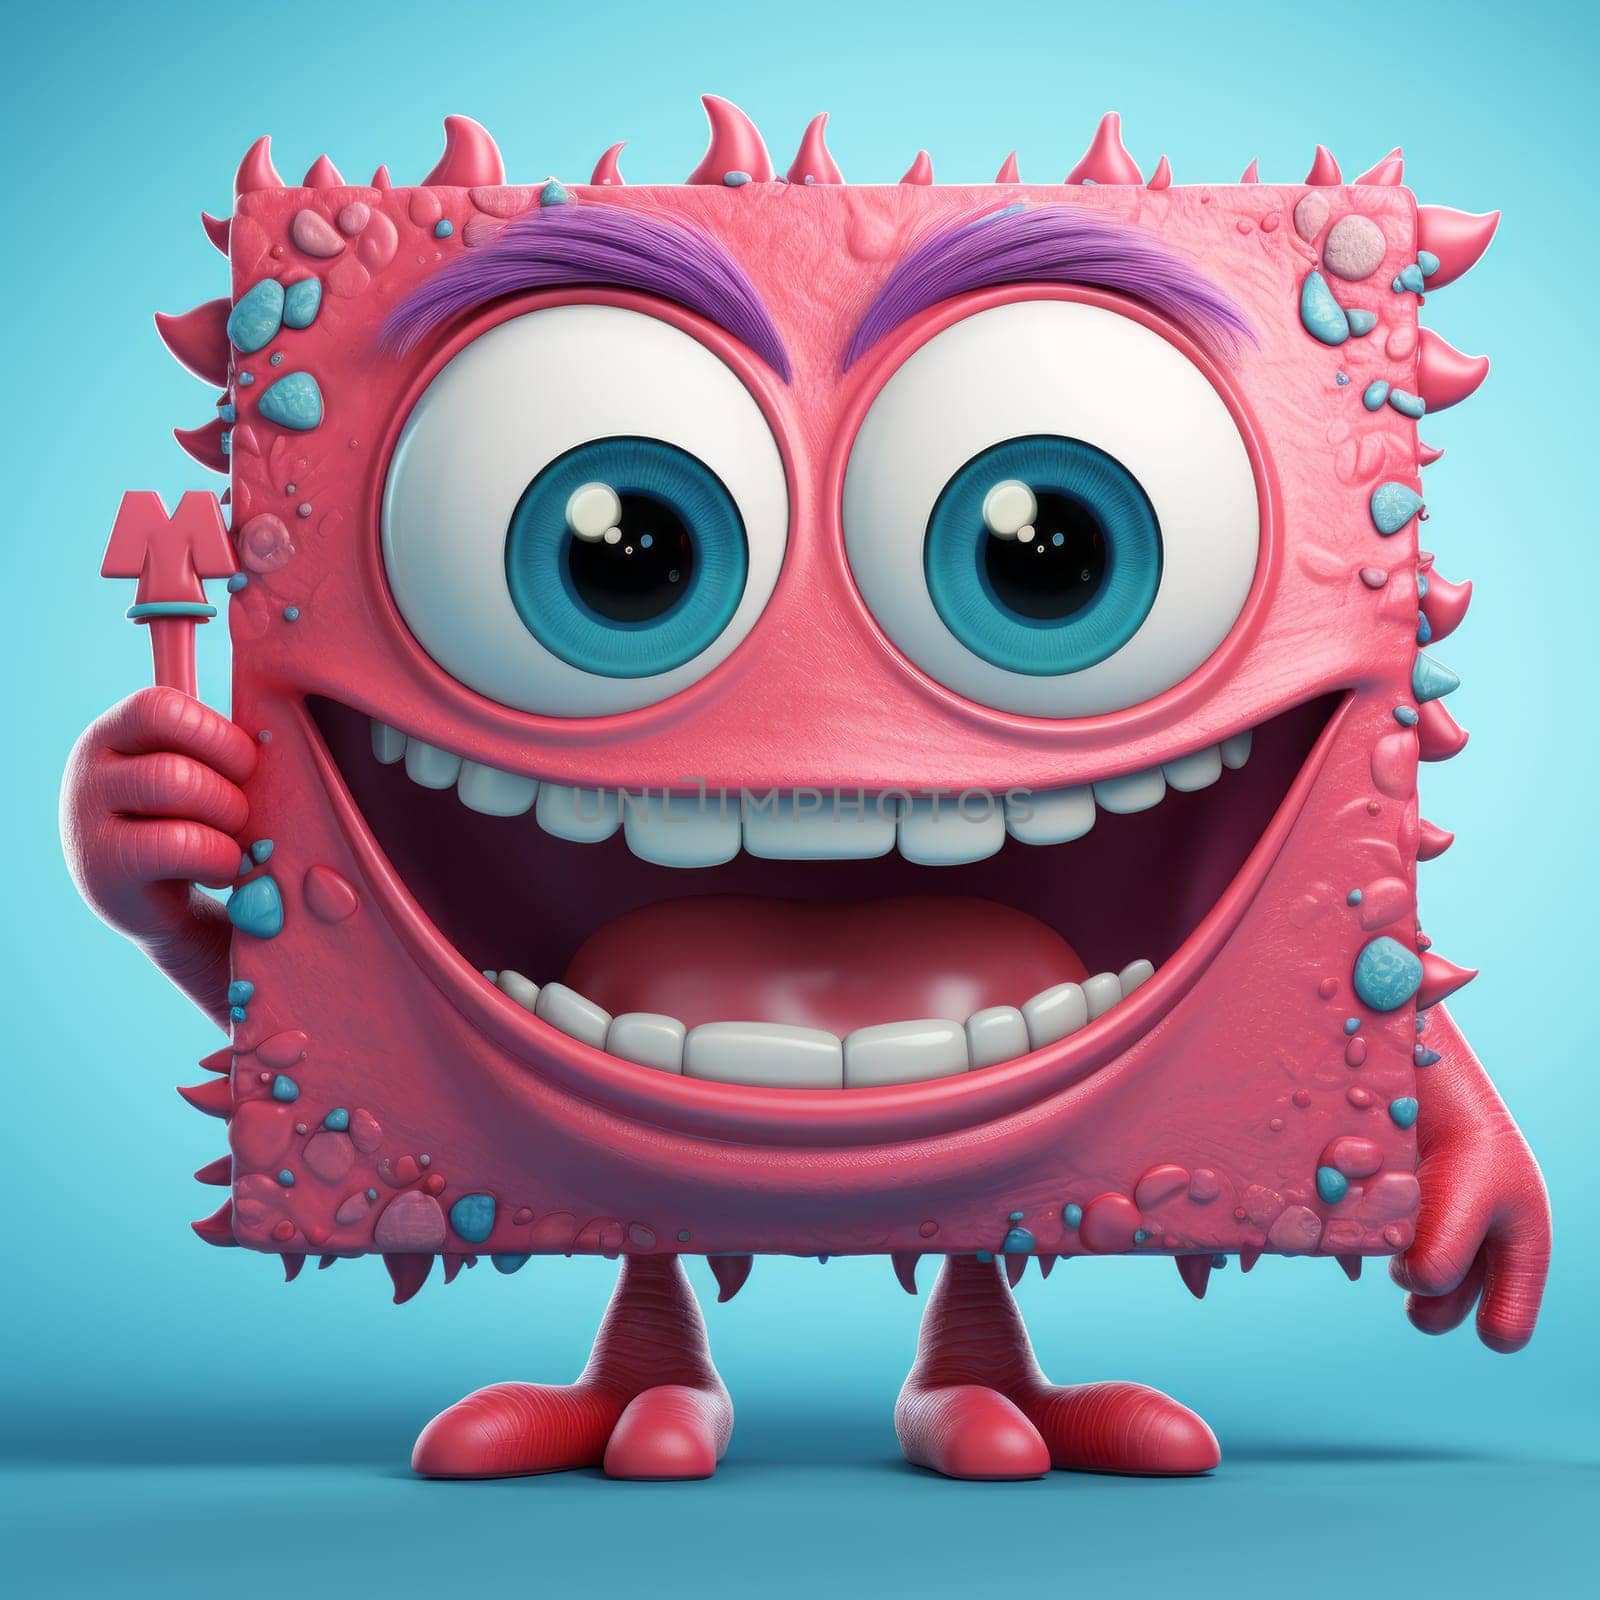 A vibrant pink cartoon monster with a trident, smiling on a blue background by Zakharova